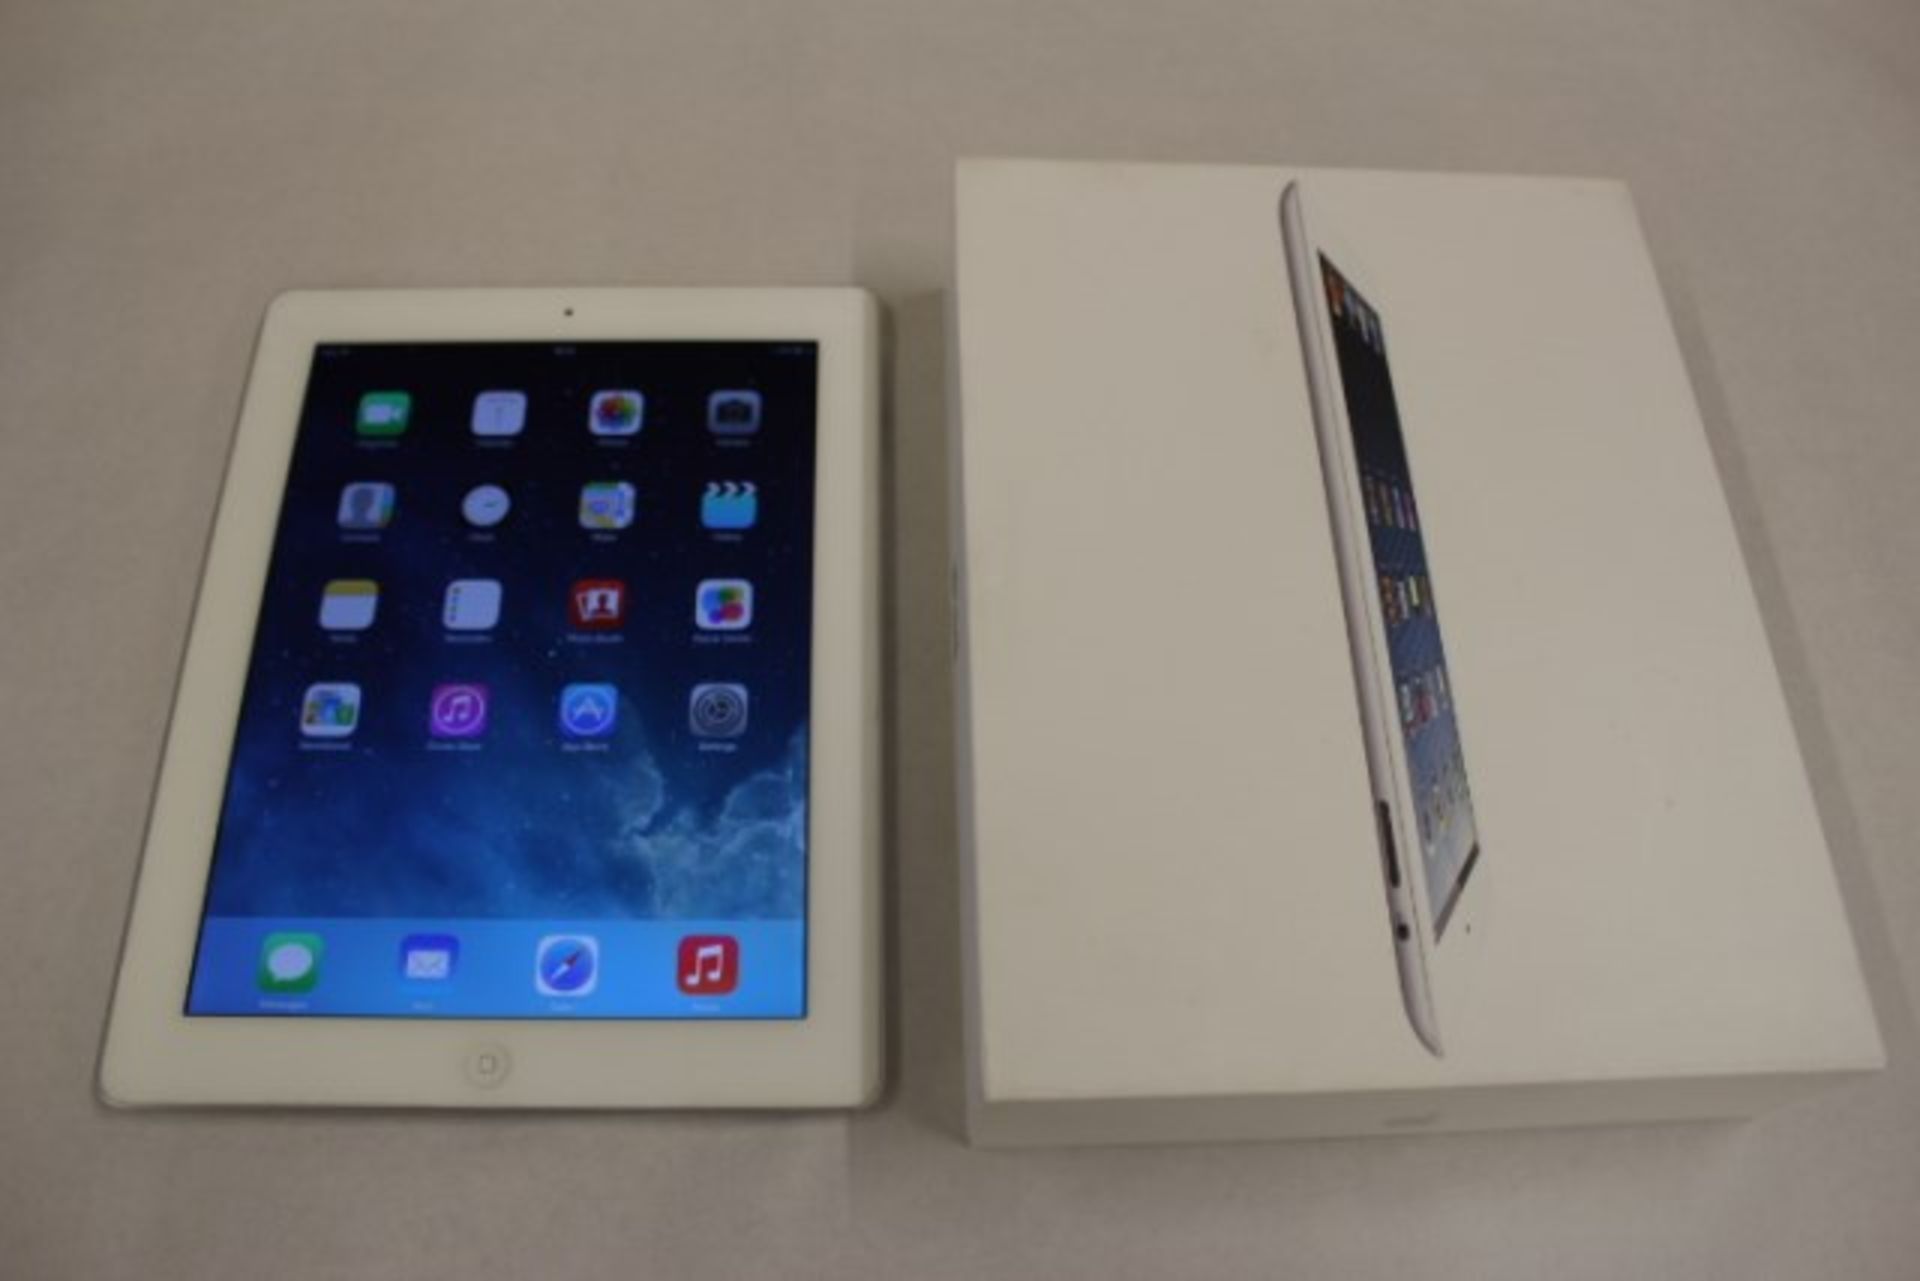 V  Grade A iPad 4 16Gb Black With Two Cameras/Retina Display With Charger In Original Box - - Image 2 of 2